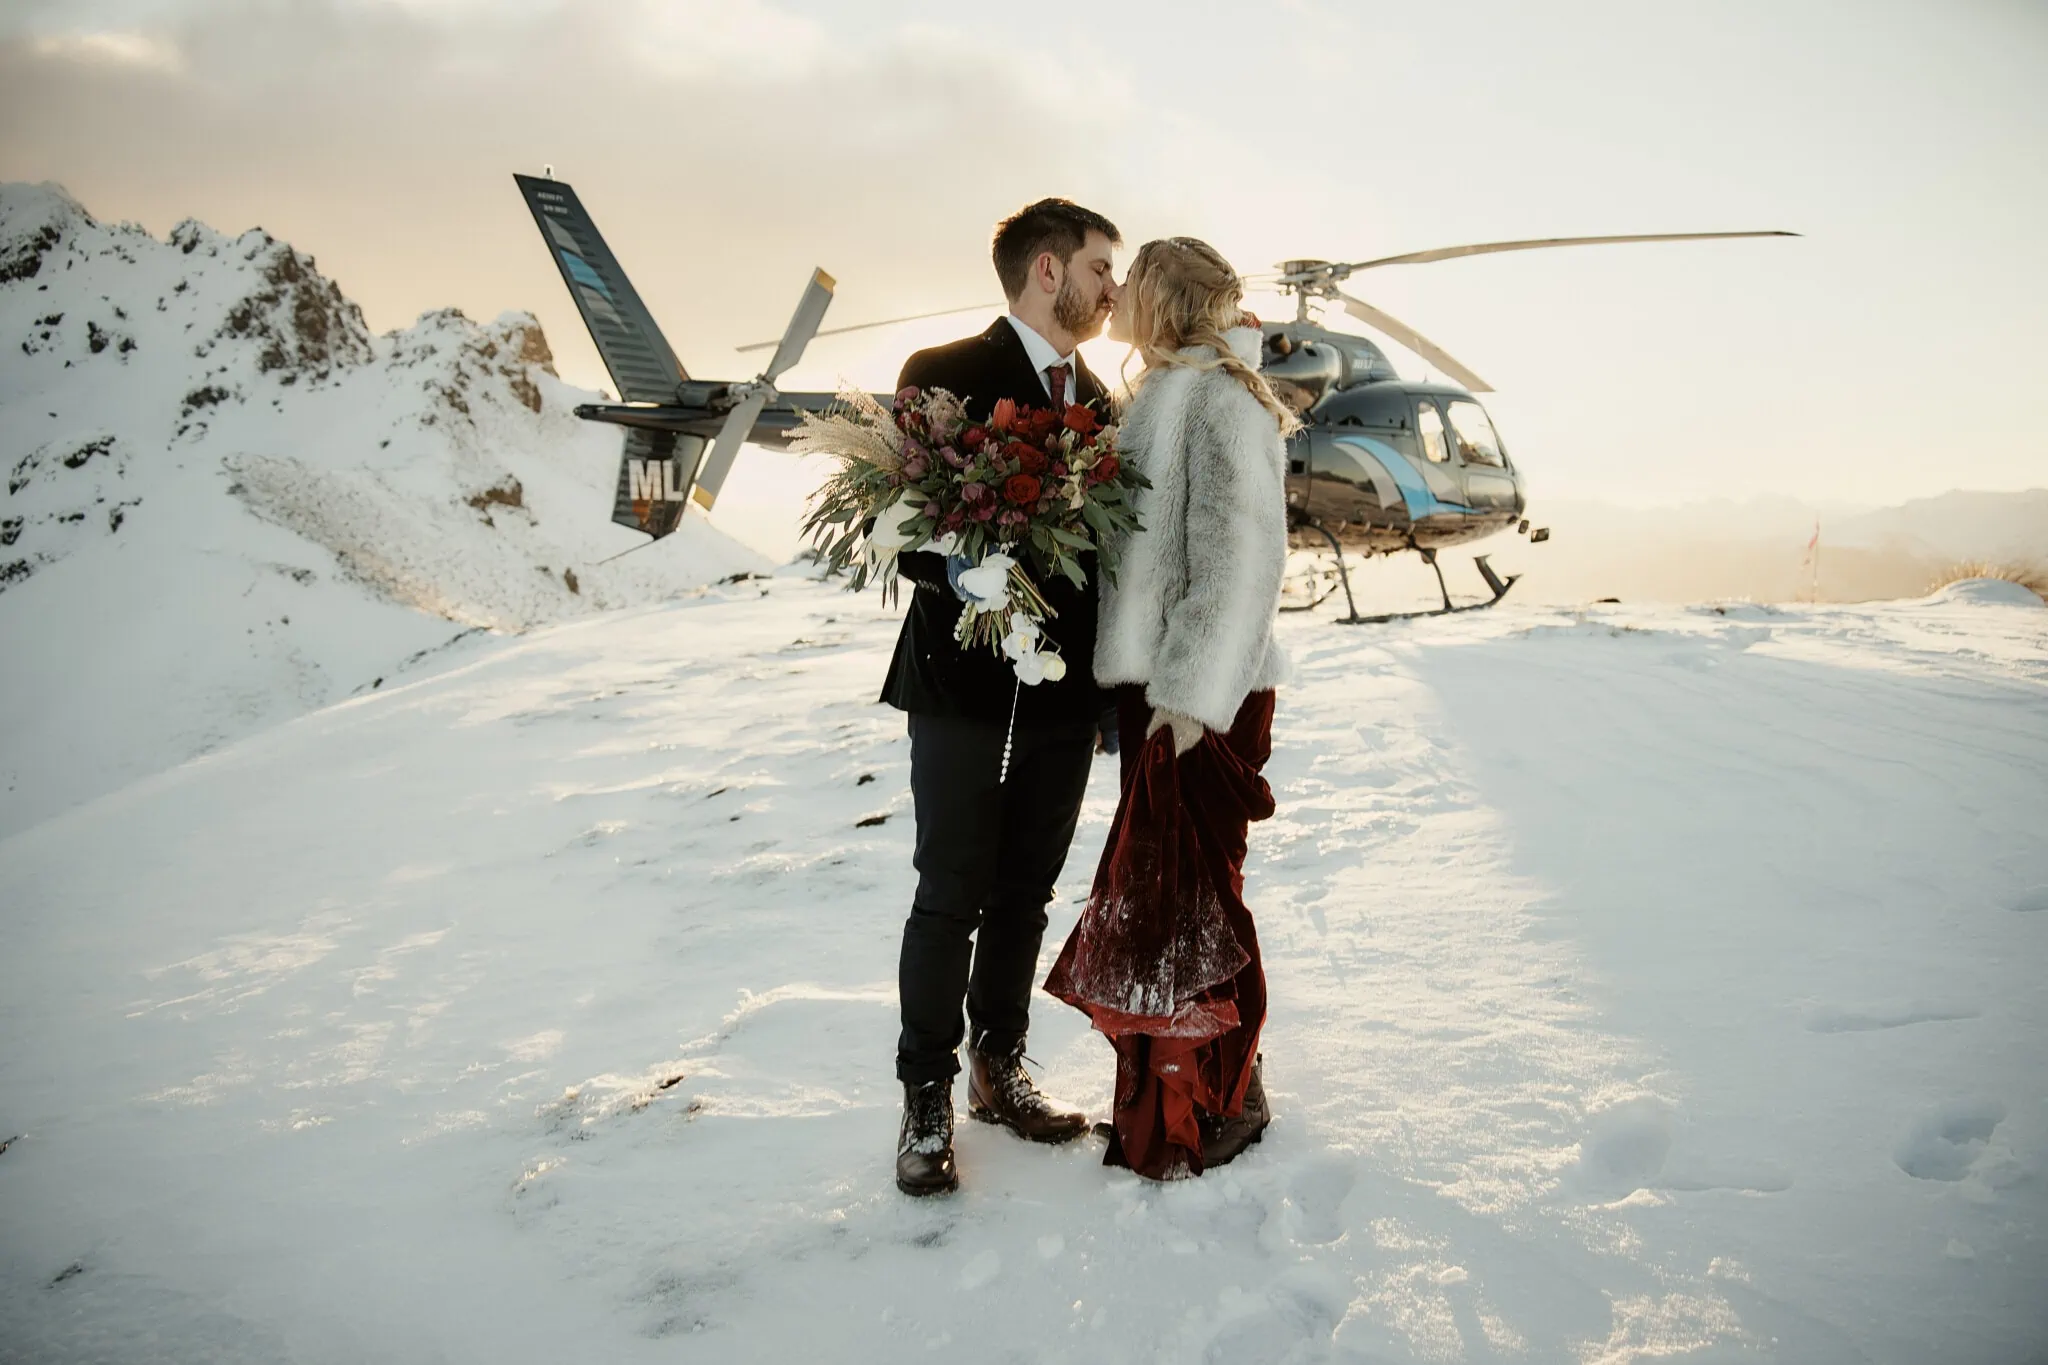 Keywords used: Claire and Rob, heli elopement wedding

Description: Claire and Rob share a kiss during their intimate heli elopement wedding.